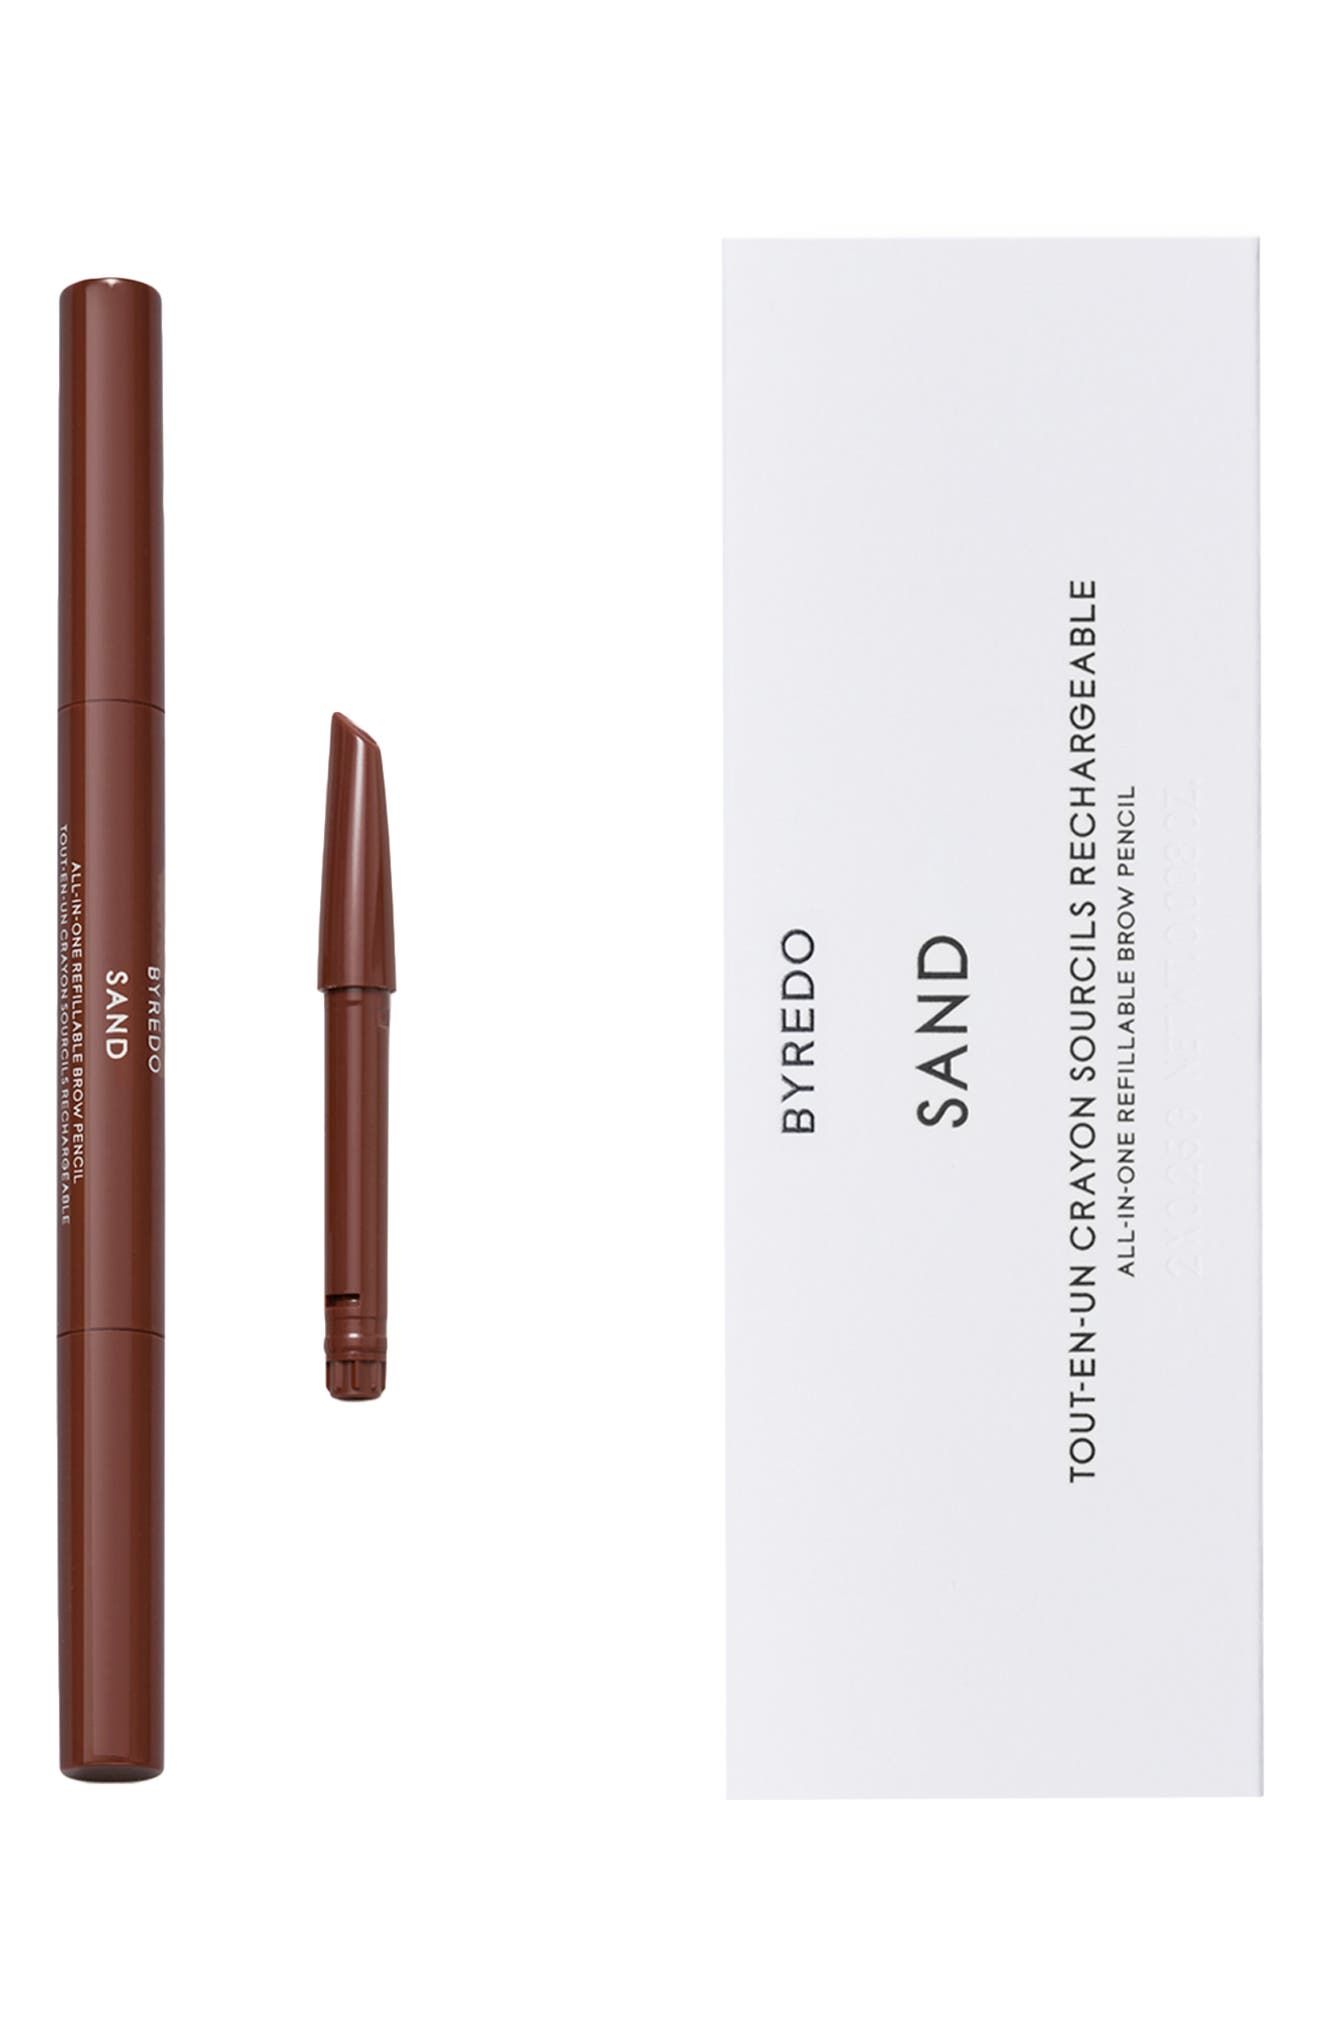 All-in-One Refillable Brow Pencil & Refill